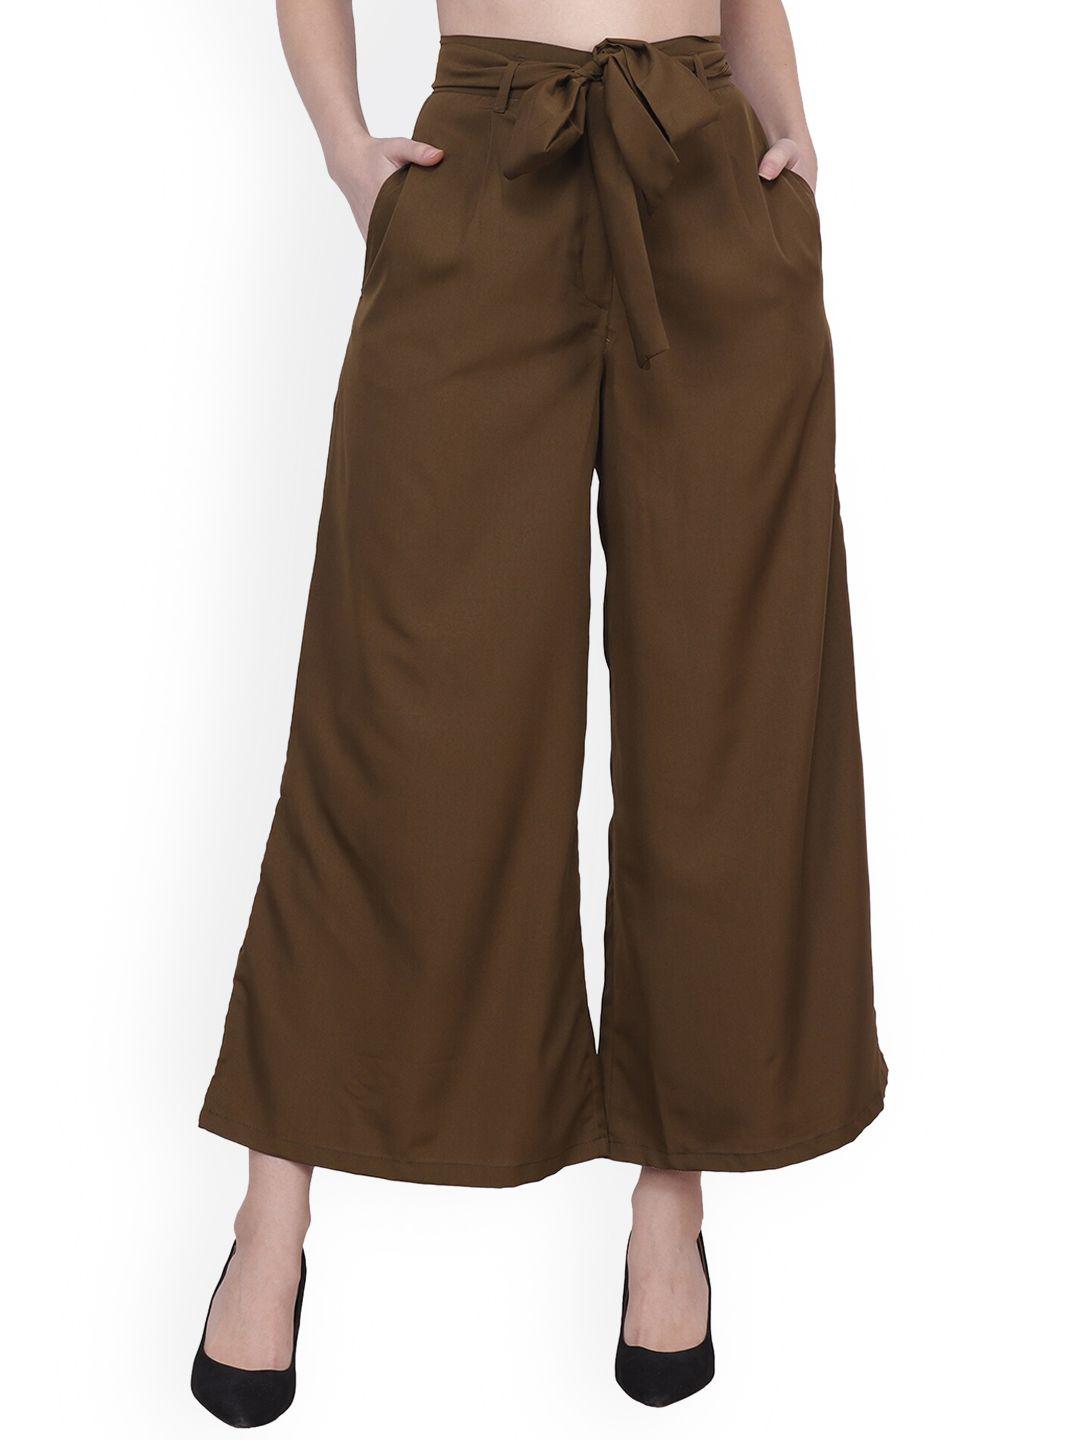 frempy women olive green original pleated culottes trousers